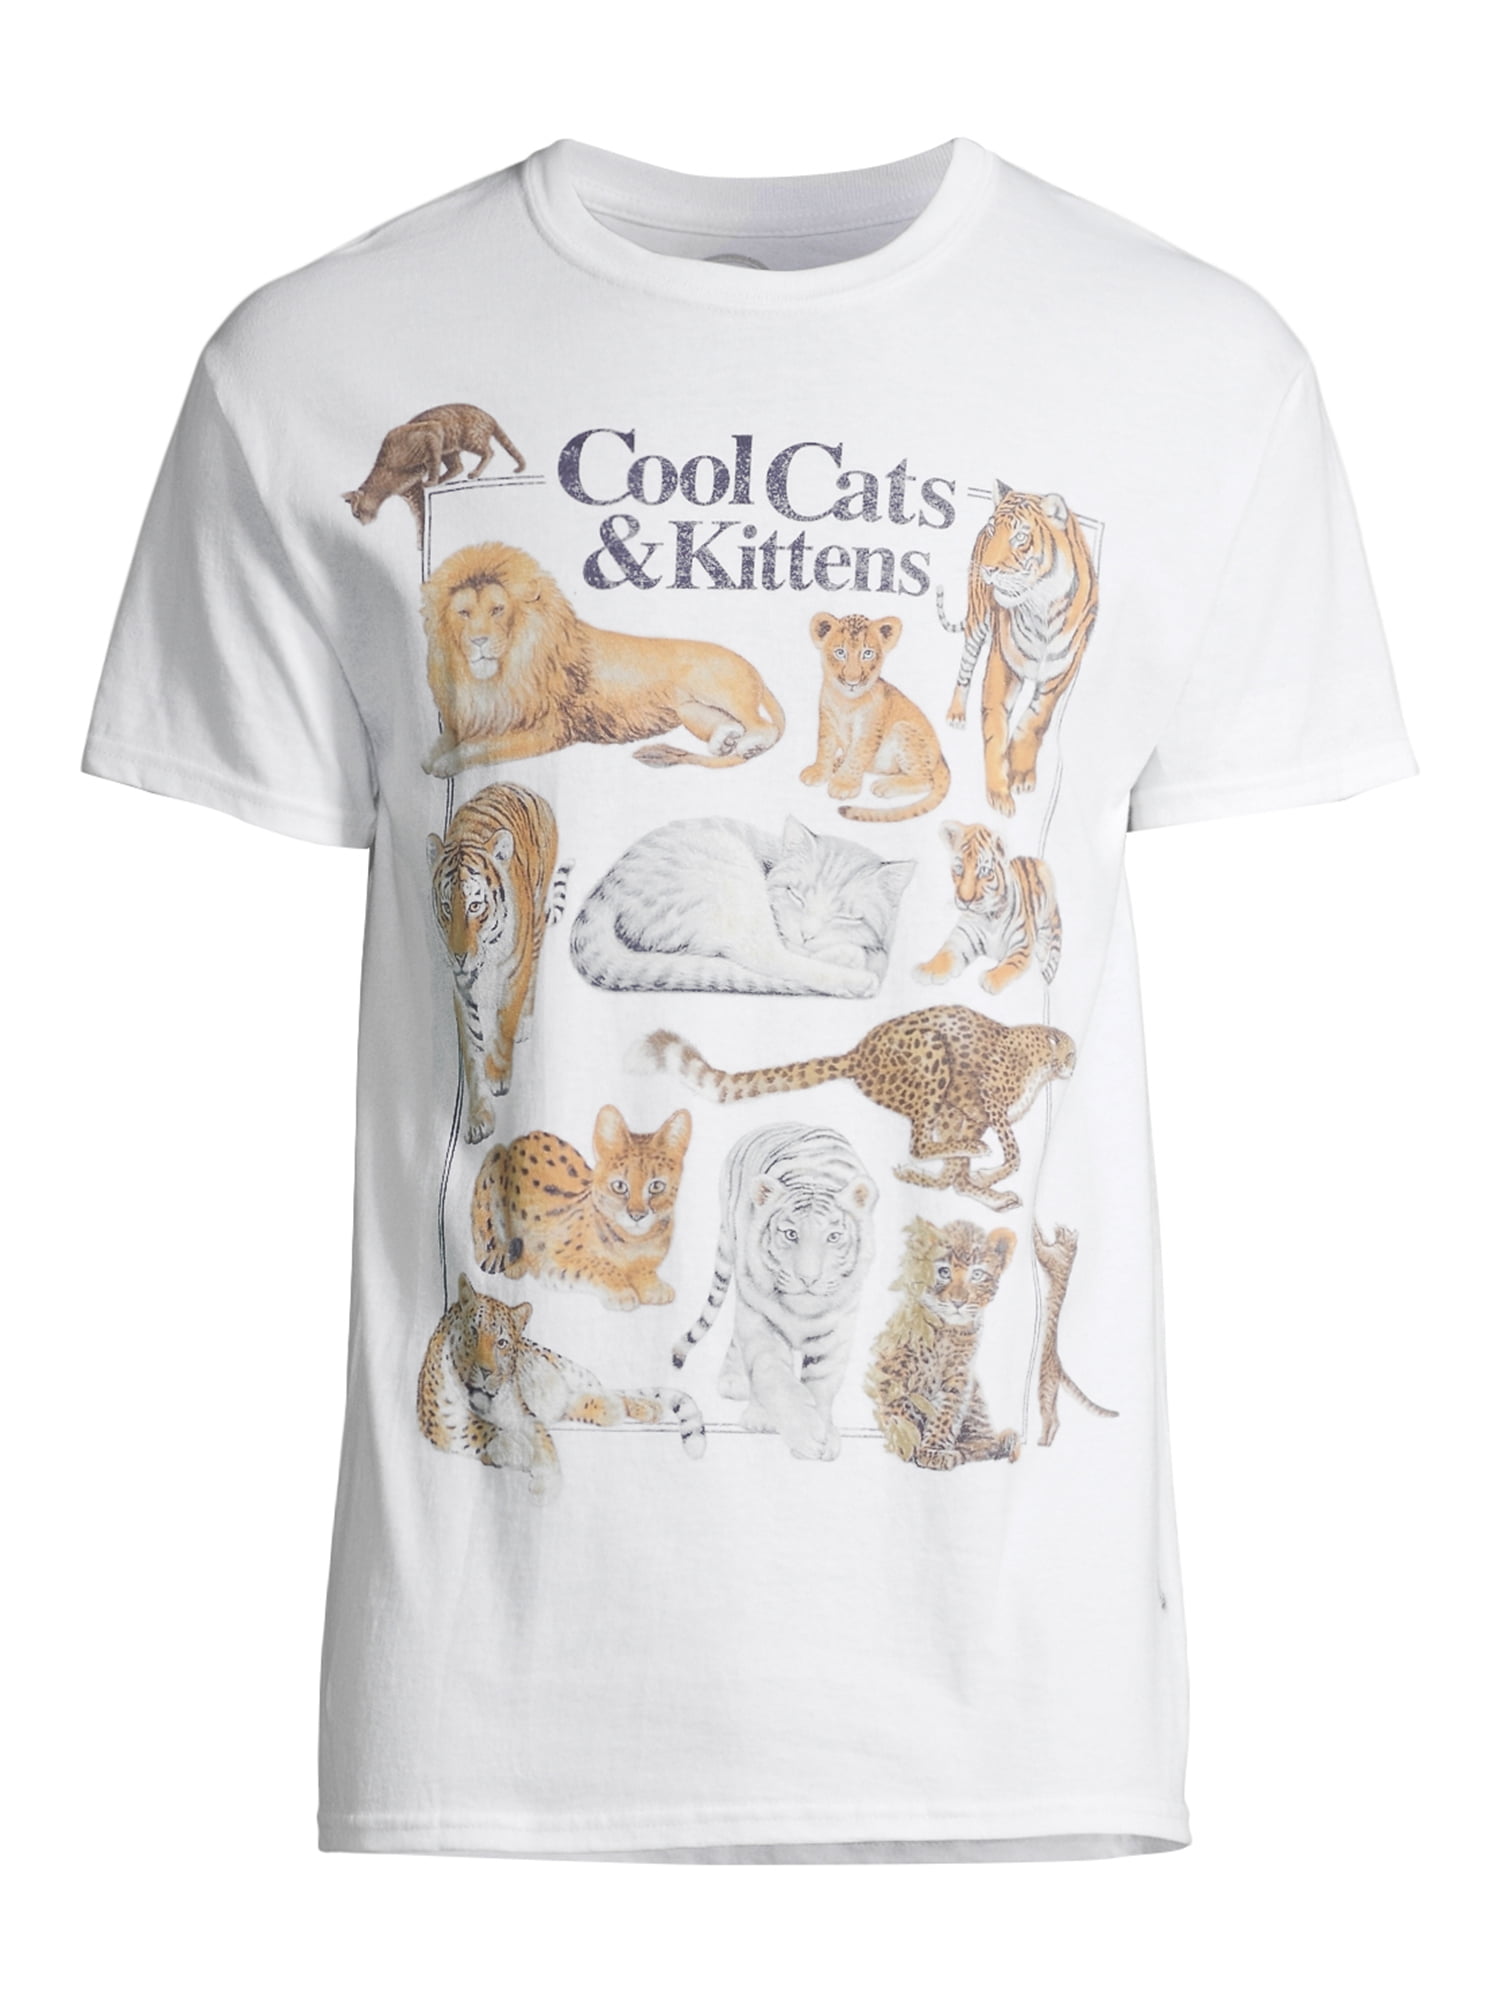 NEW Cool Cats and Kittens Graphic Novelty Cotton T Shirt Men/'s Size  S UNISEX